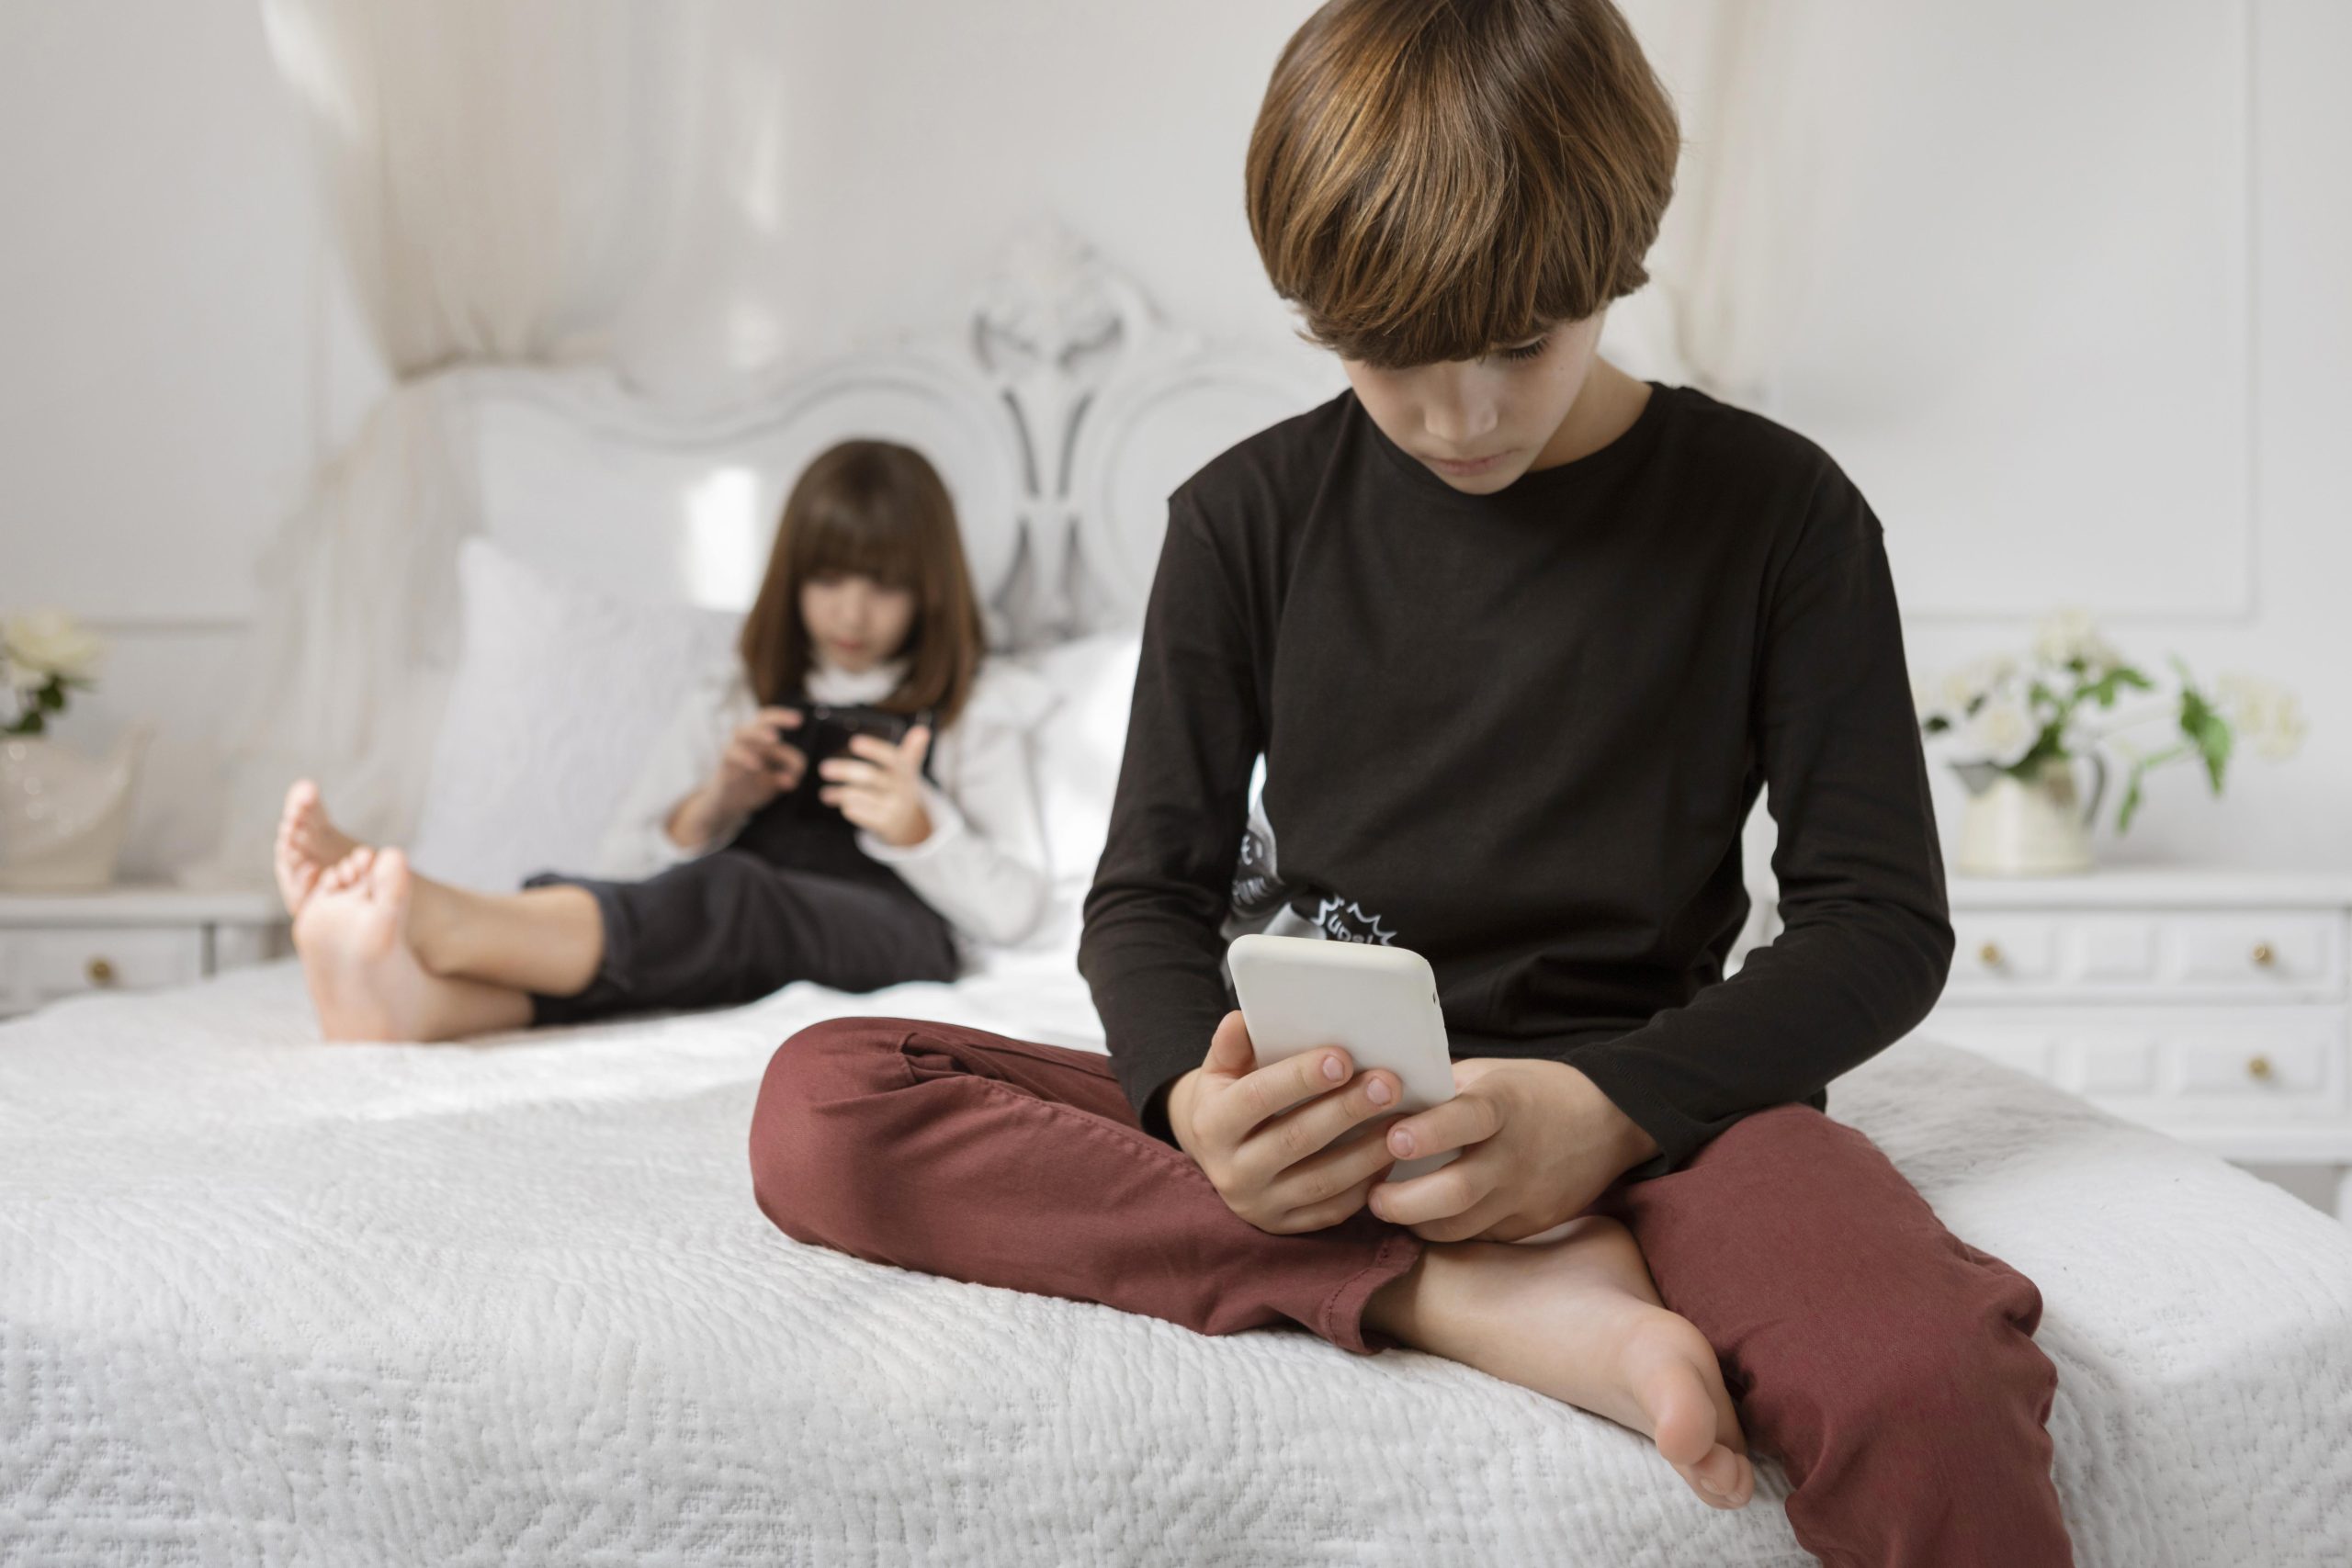 Ensuring Online Safety: The Role of Parental Control Apps